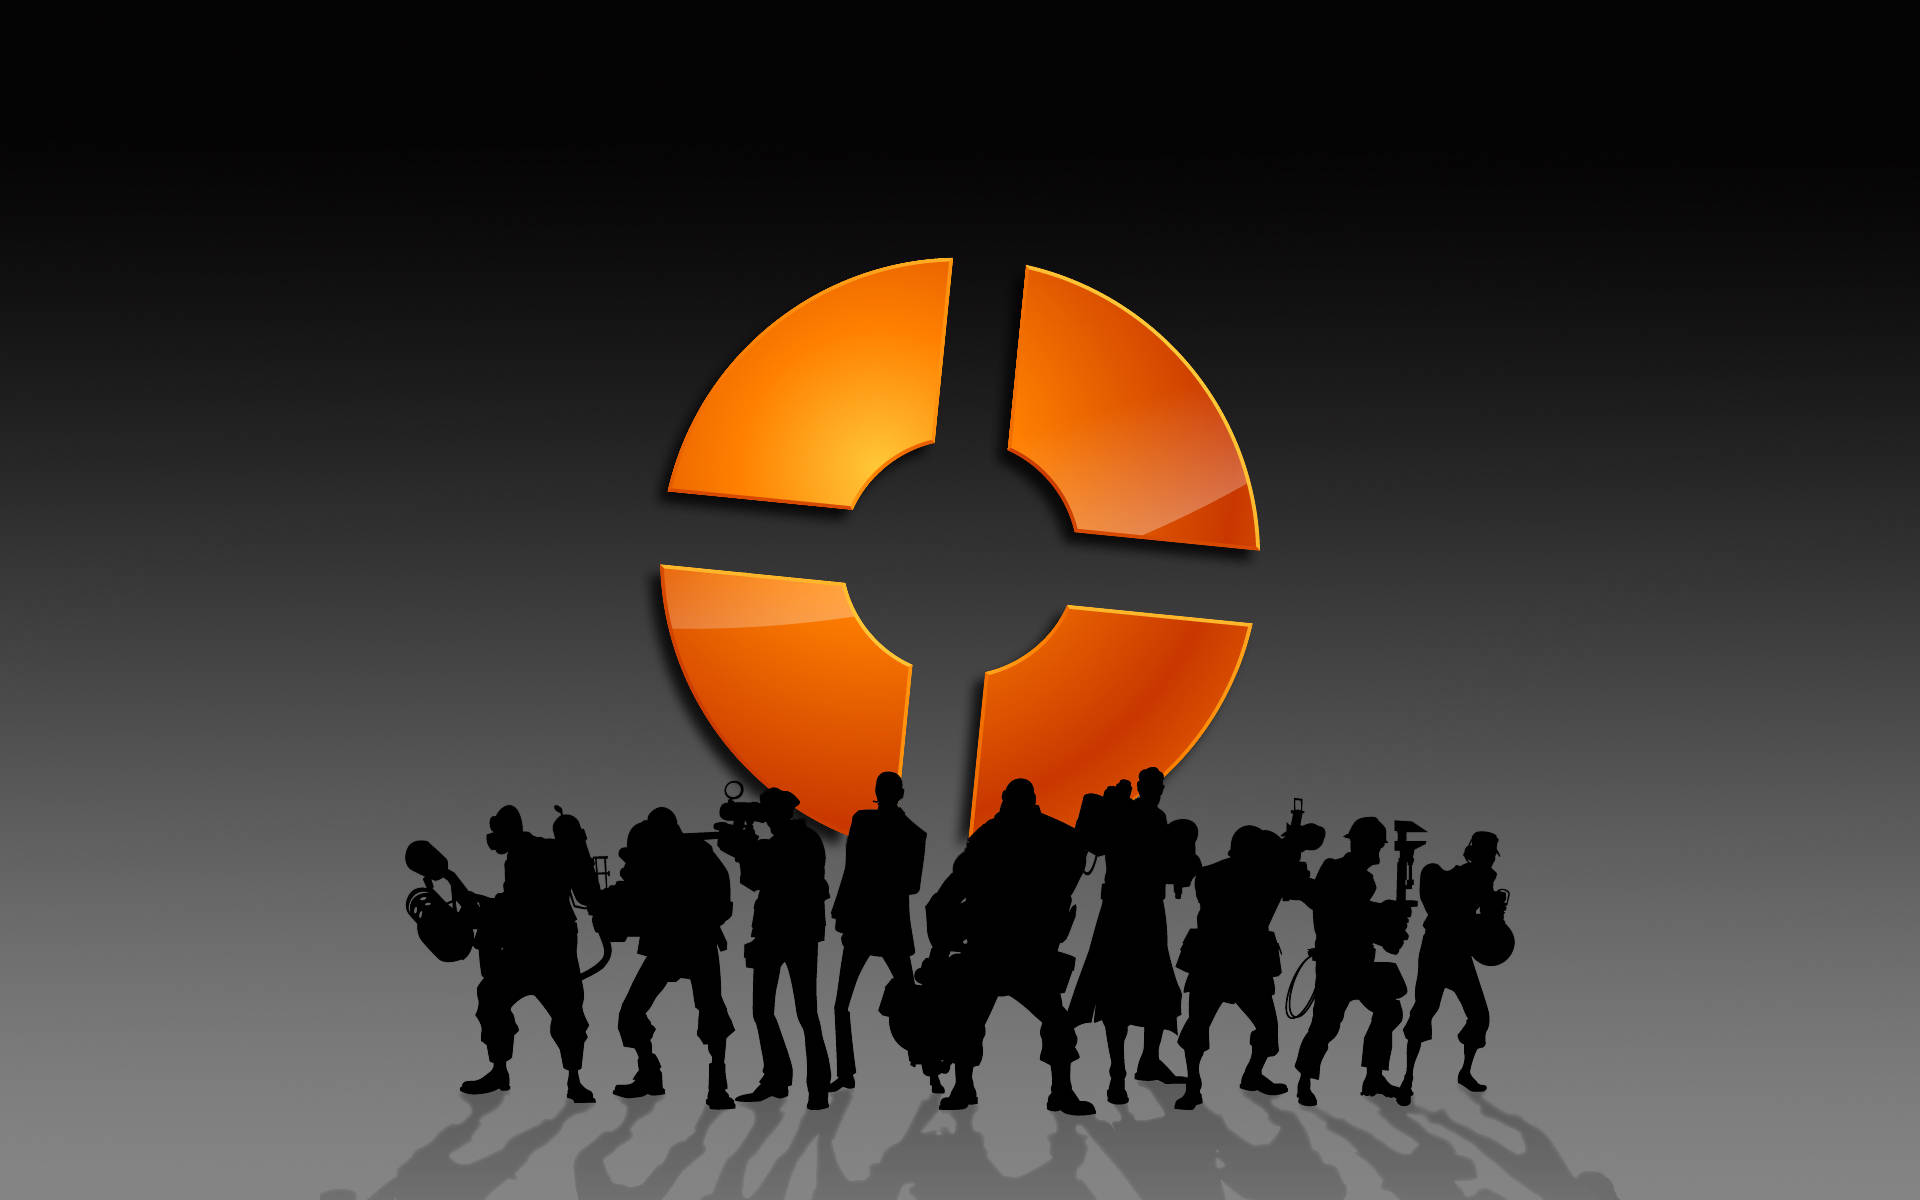 Team Fortress 2 Logo And Silhouettes Background